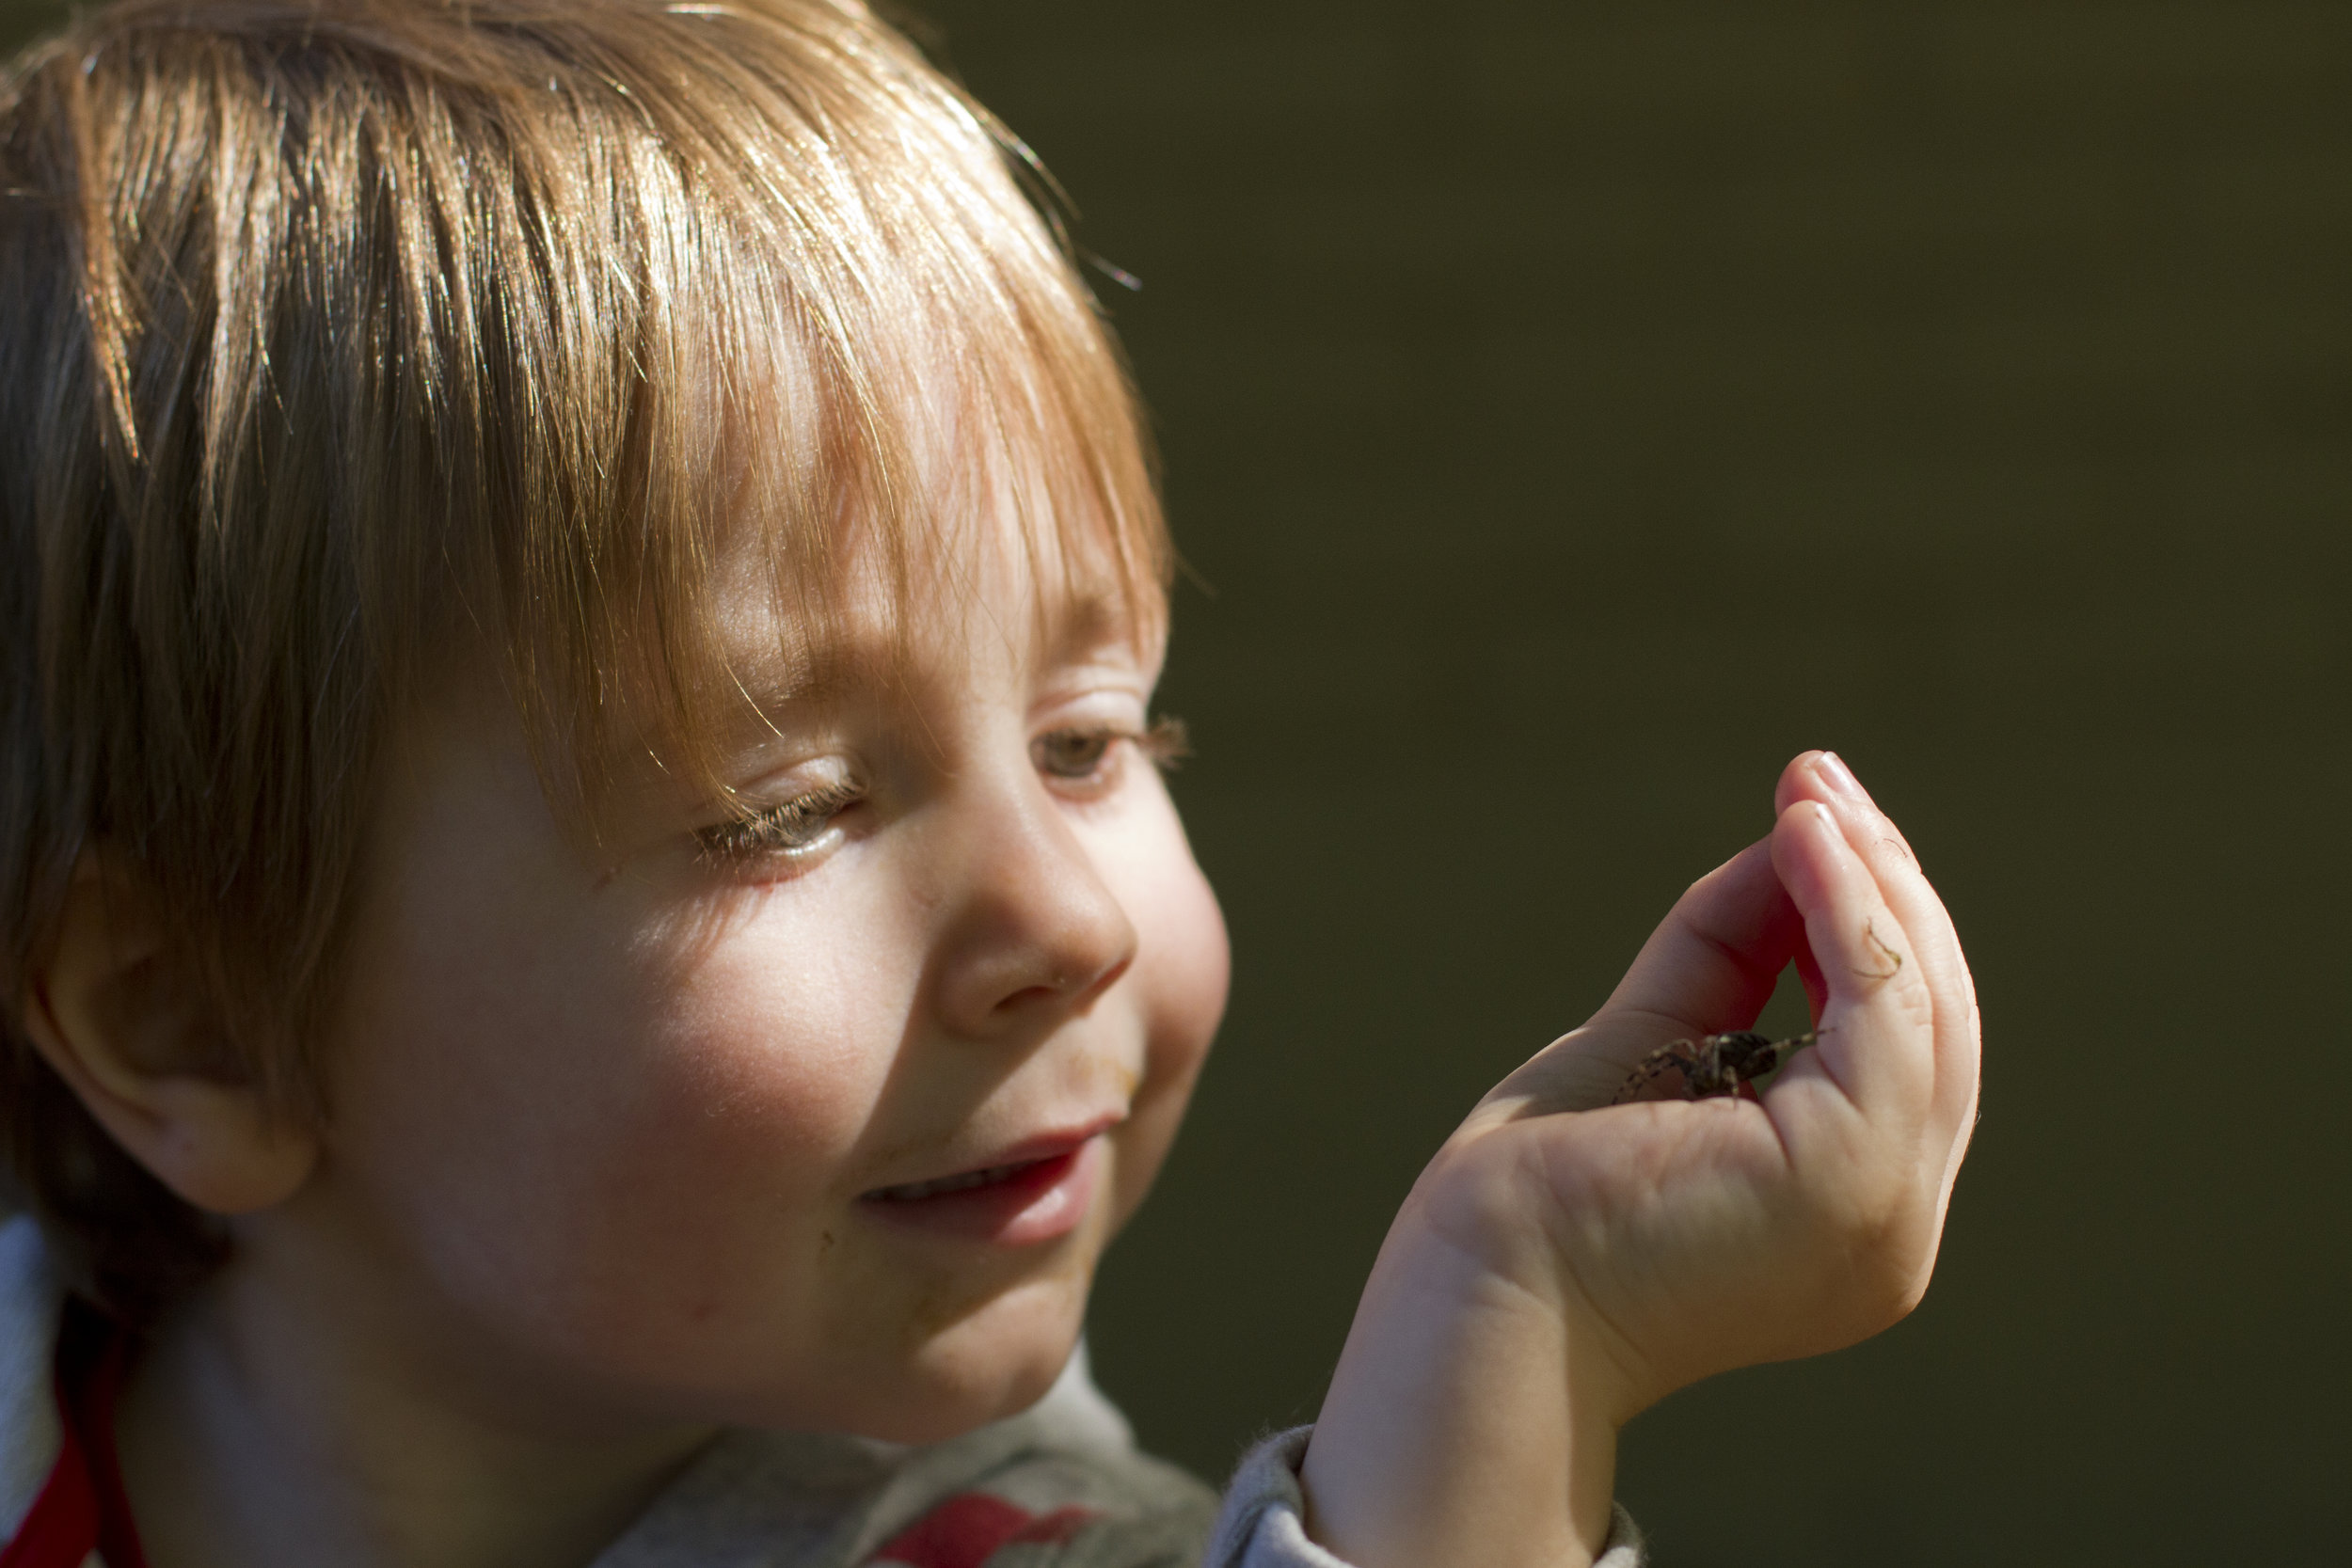 A young student watches a spider held in the cup of their hand.